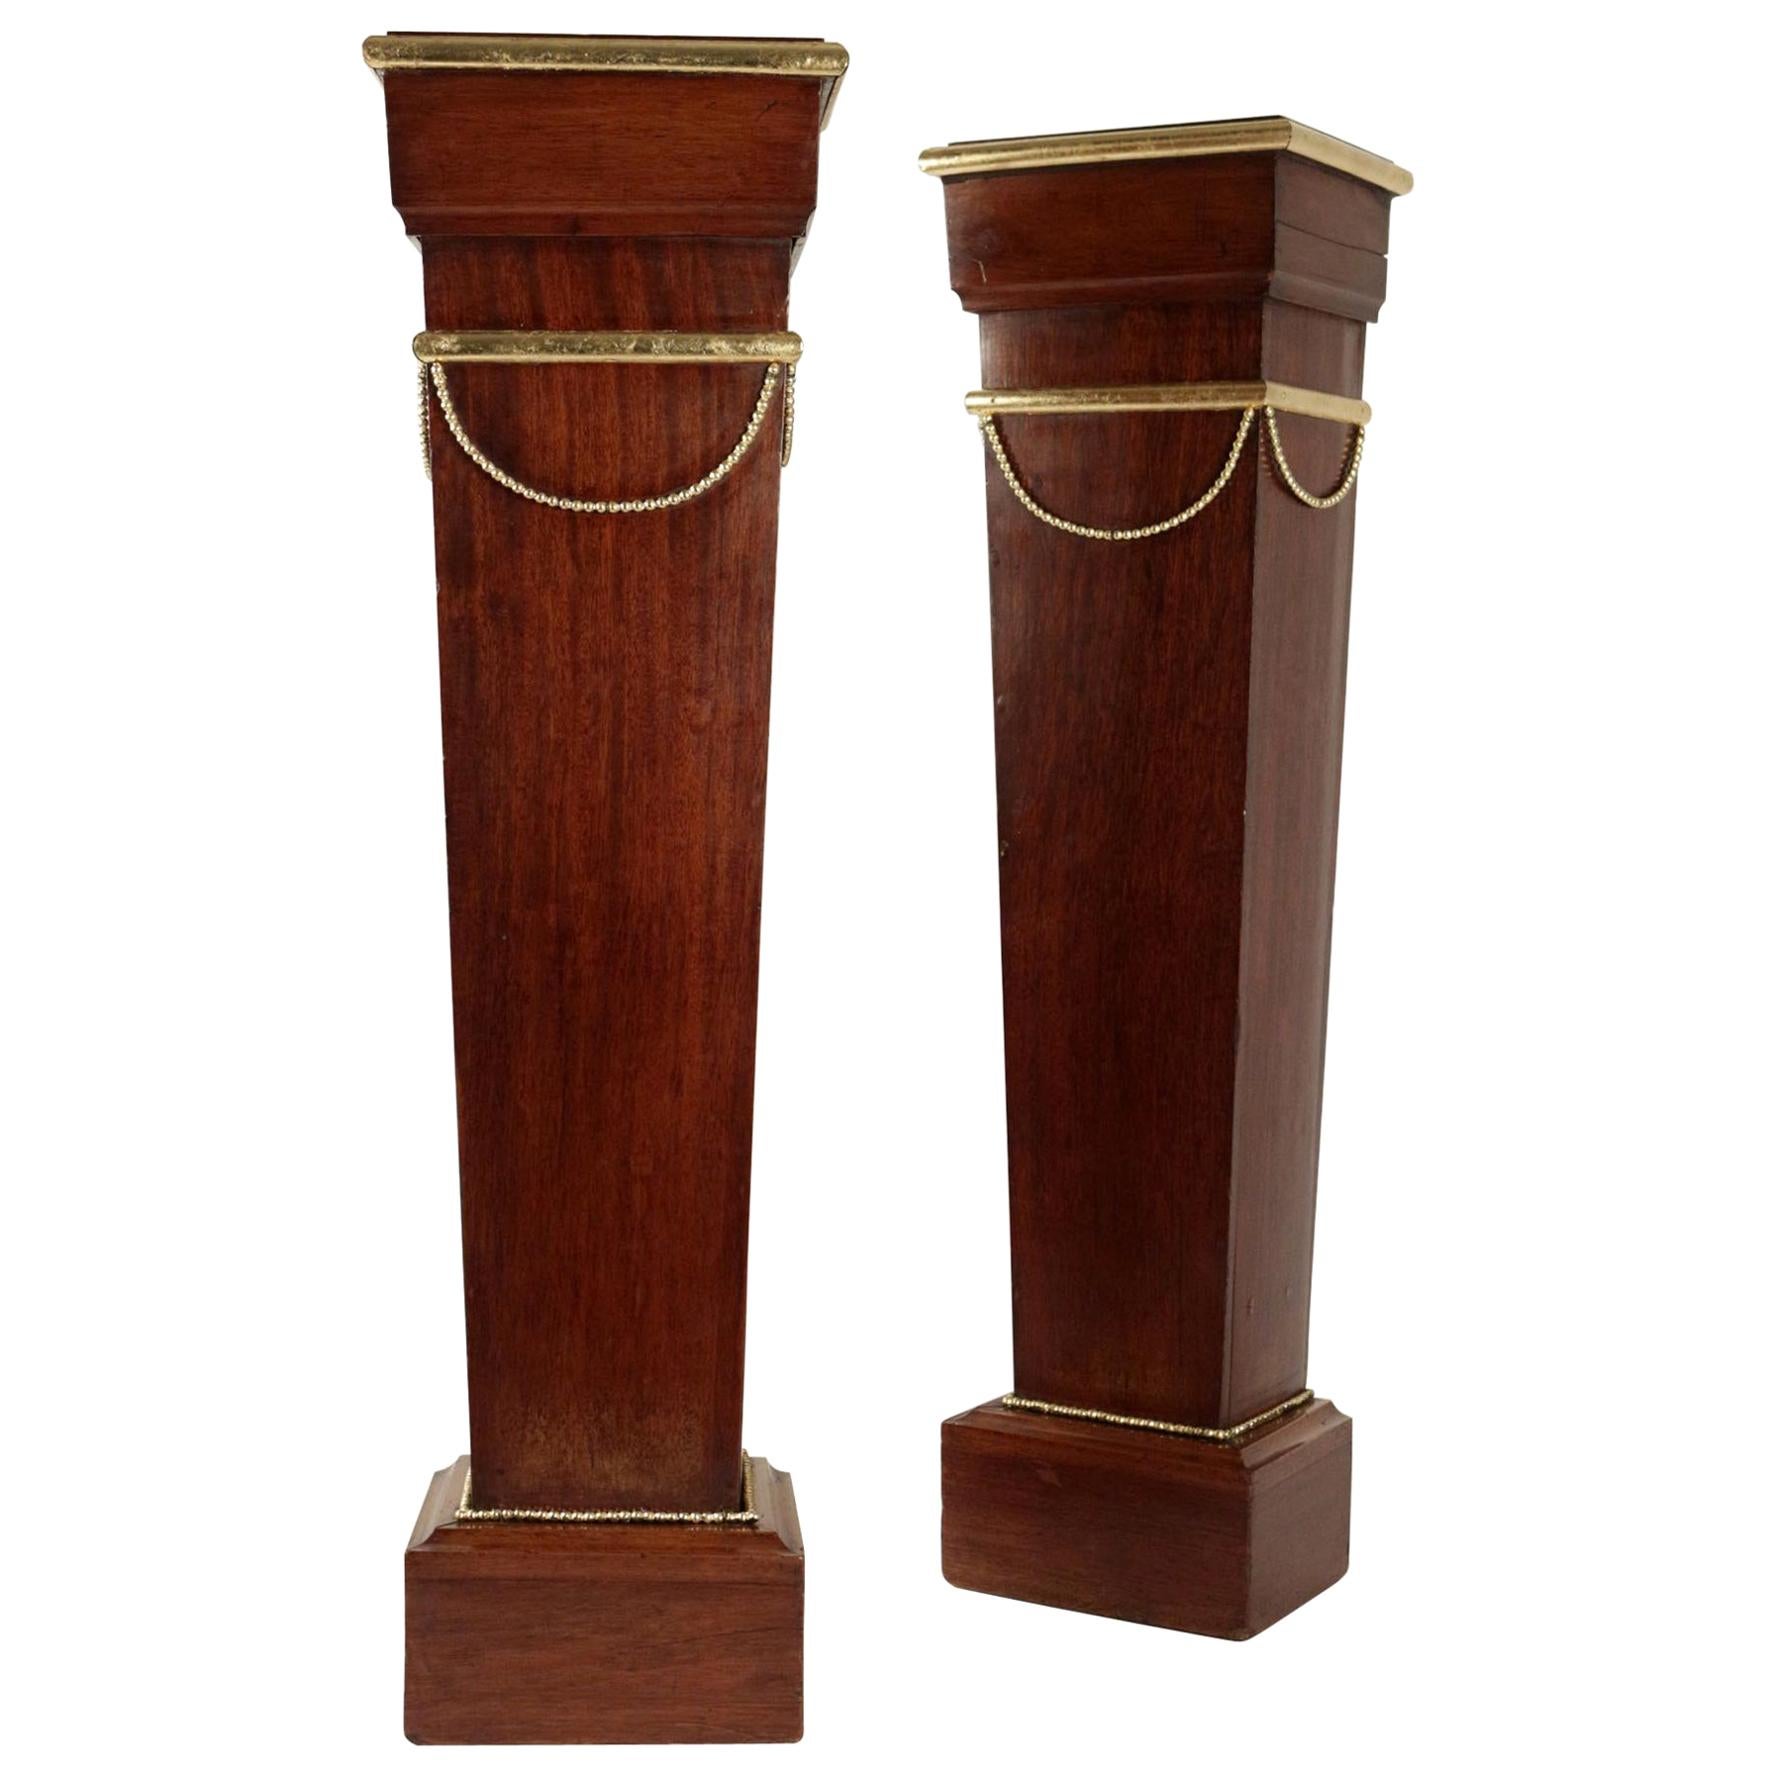 Pair of Sheaths, Consoles, Mahogany, Golden at the Gold Leaf, 19th Century For Sale